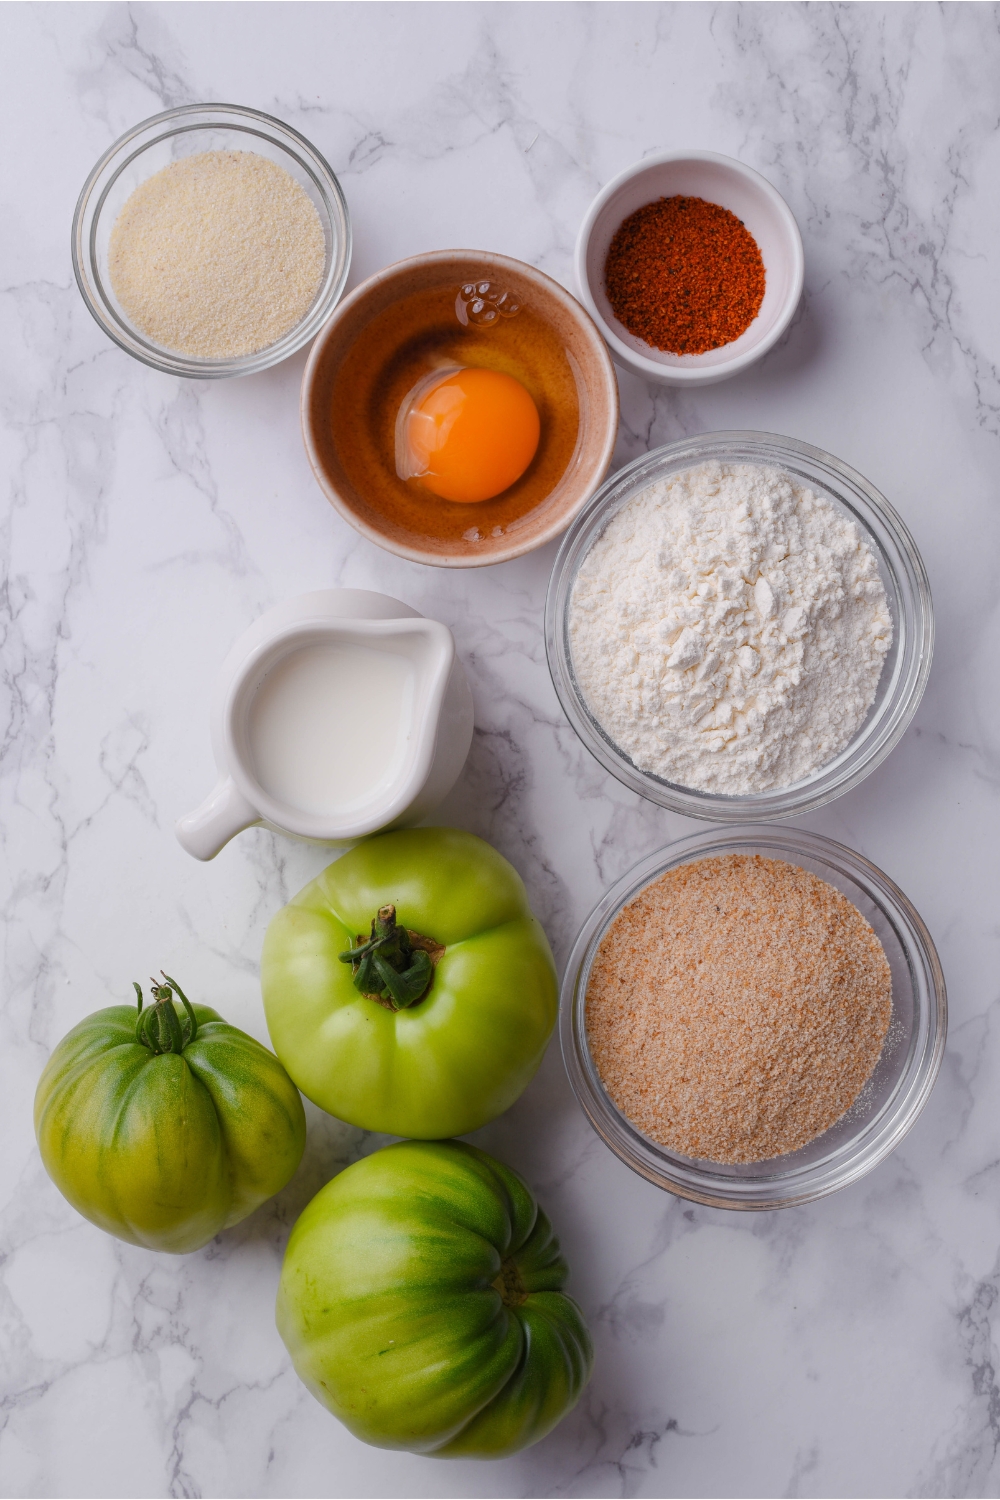 An assortment of ingredients including three green tomatoes, a pitcher of milk, and bowls of flour, bread crumbs, paprika, and an unbeaten egg.